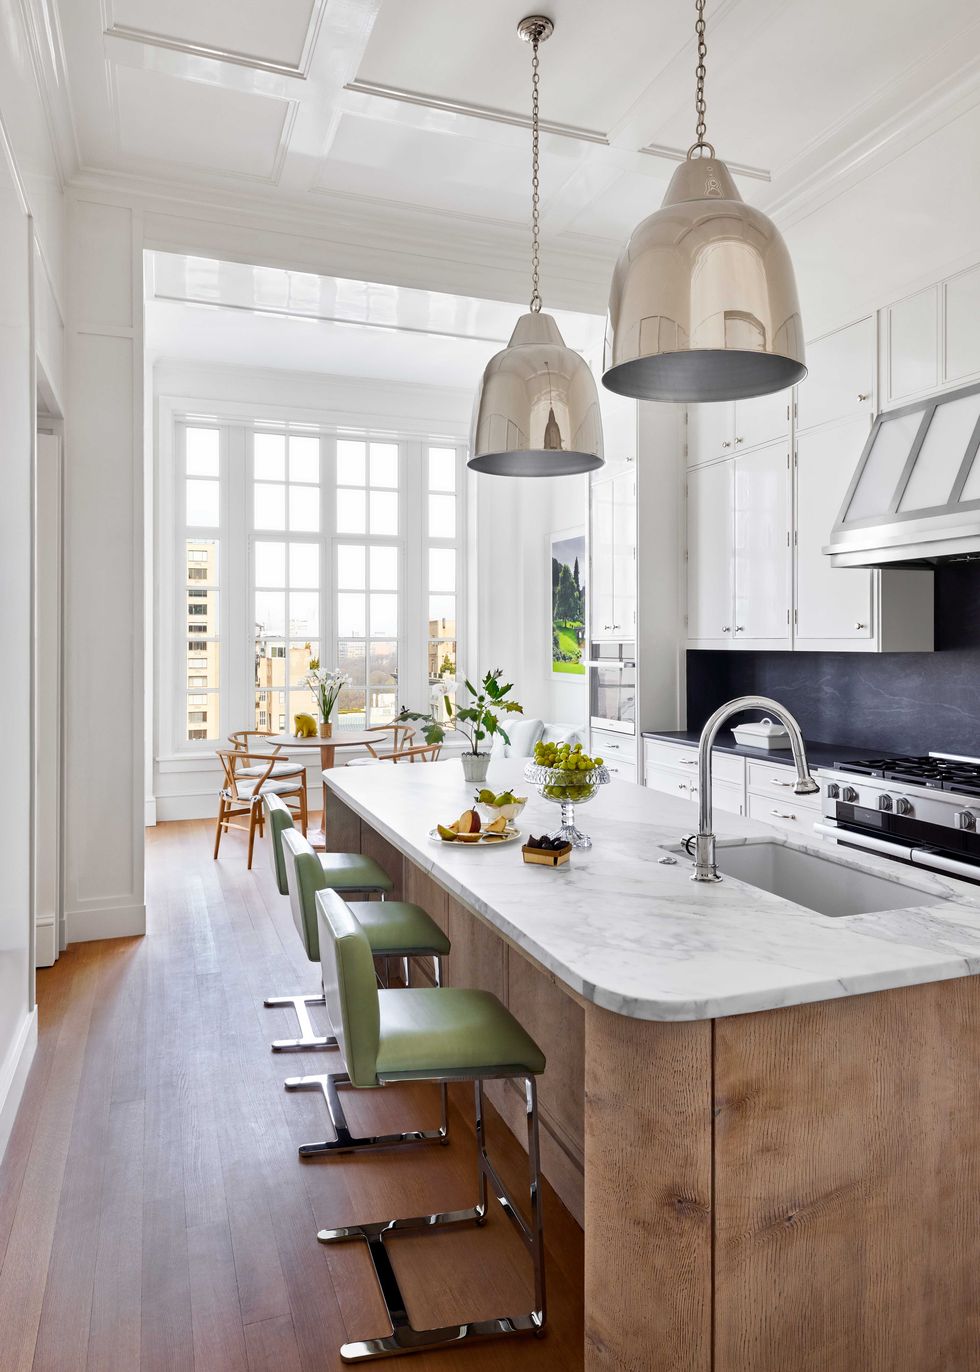 15+ Countertop Design Ideas to Inspire Your Kitchen Remodel by Livspace